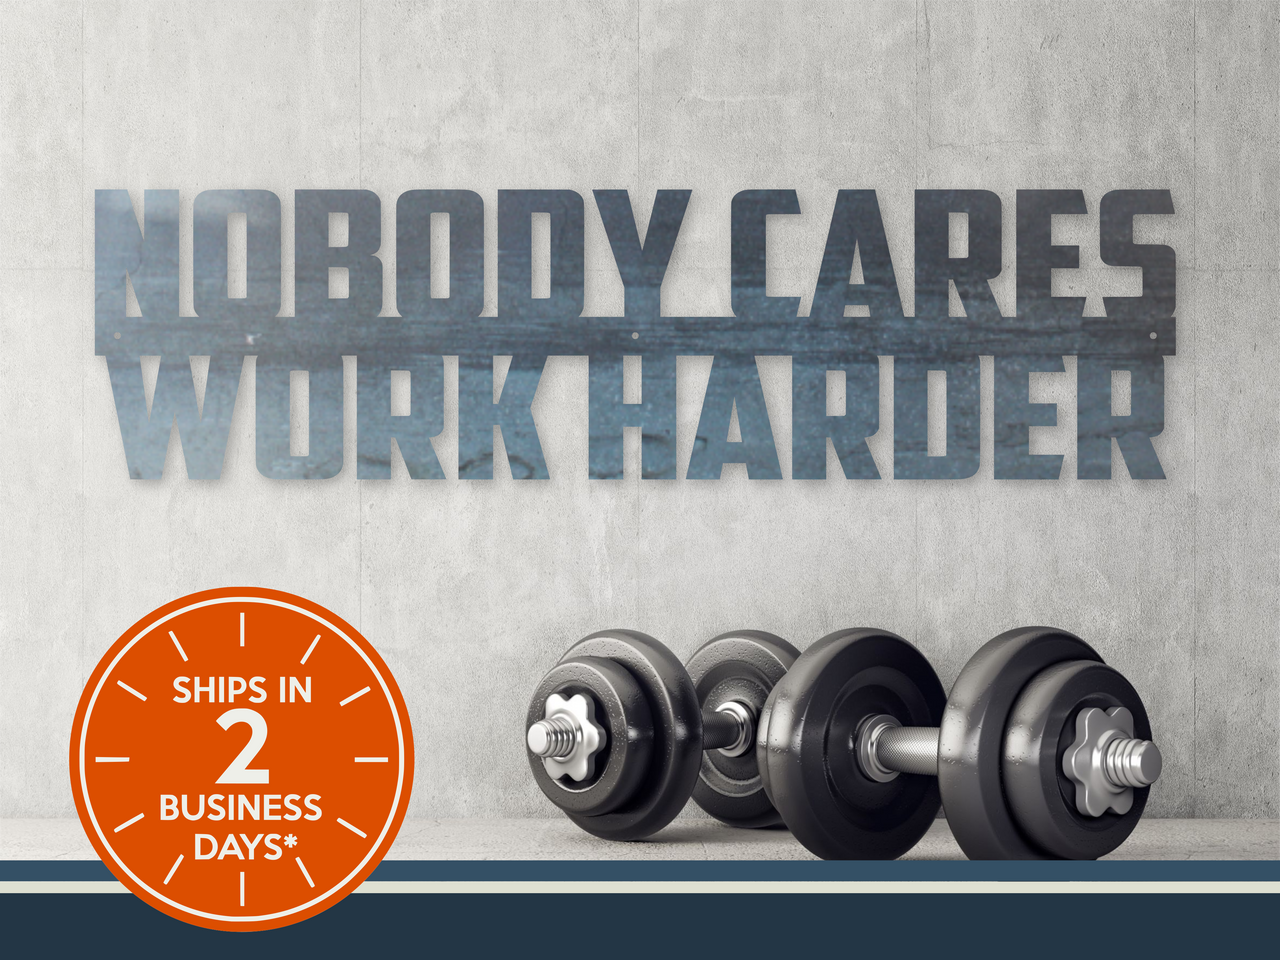 Nobody Cares Work Harder - Metal Motivational Quote Sign - Home Gym Decor - Modern Metal Wall Sign - Workout Sign - Free Shipping